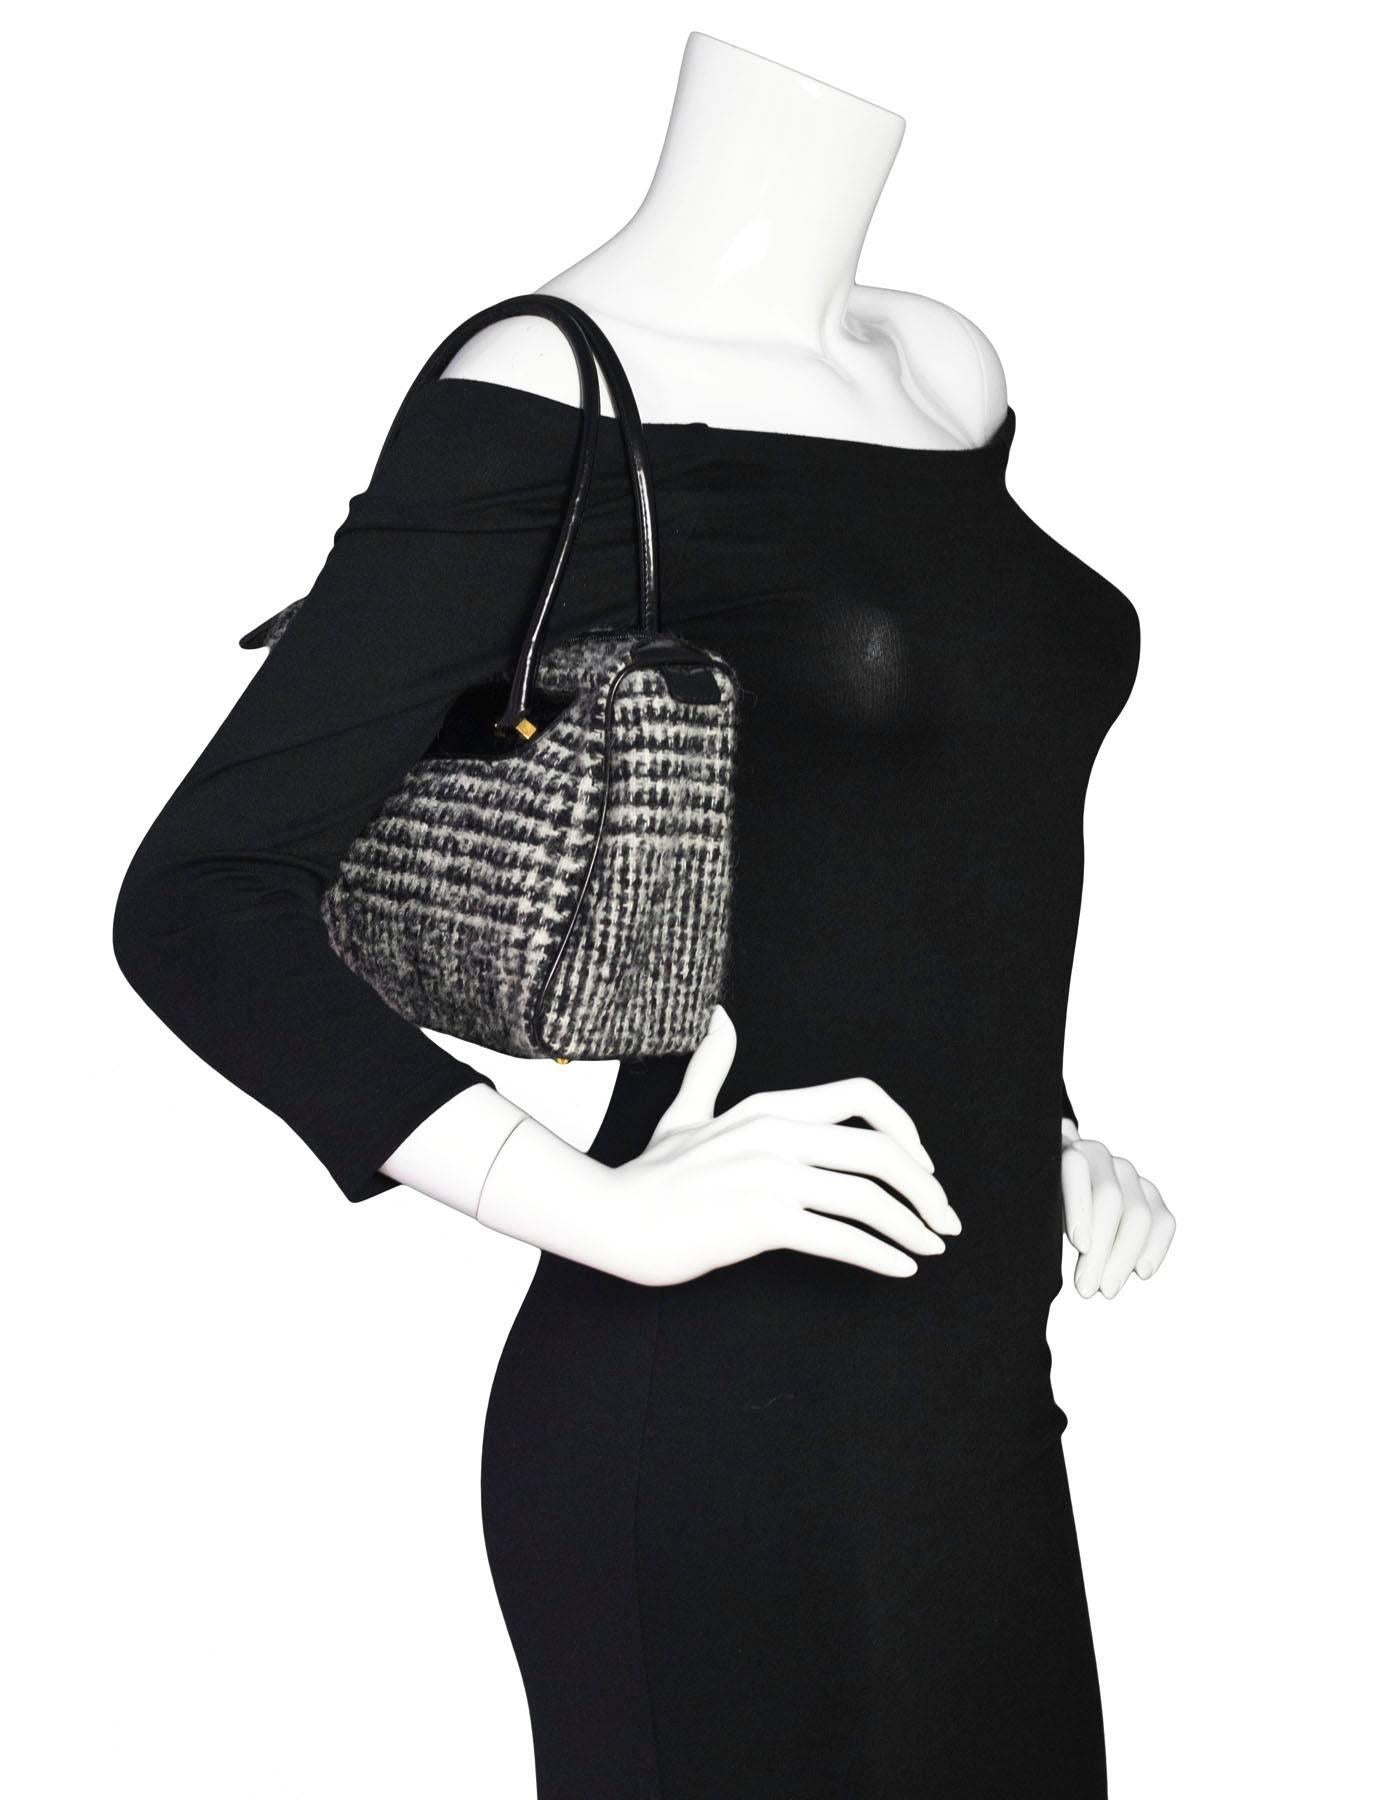 Dolce & Gabbana Black & White Tweed Herringbone Handbag

Made In: Italy
Color: Black, white
Hardware: Goldtone 
Materials: Tweed, patent leather
Lining: Leopard canvas
Closure/Opening: Zip closure
Exterior Pockets: None
Interior Pockets: Zip wall